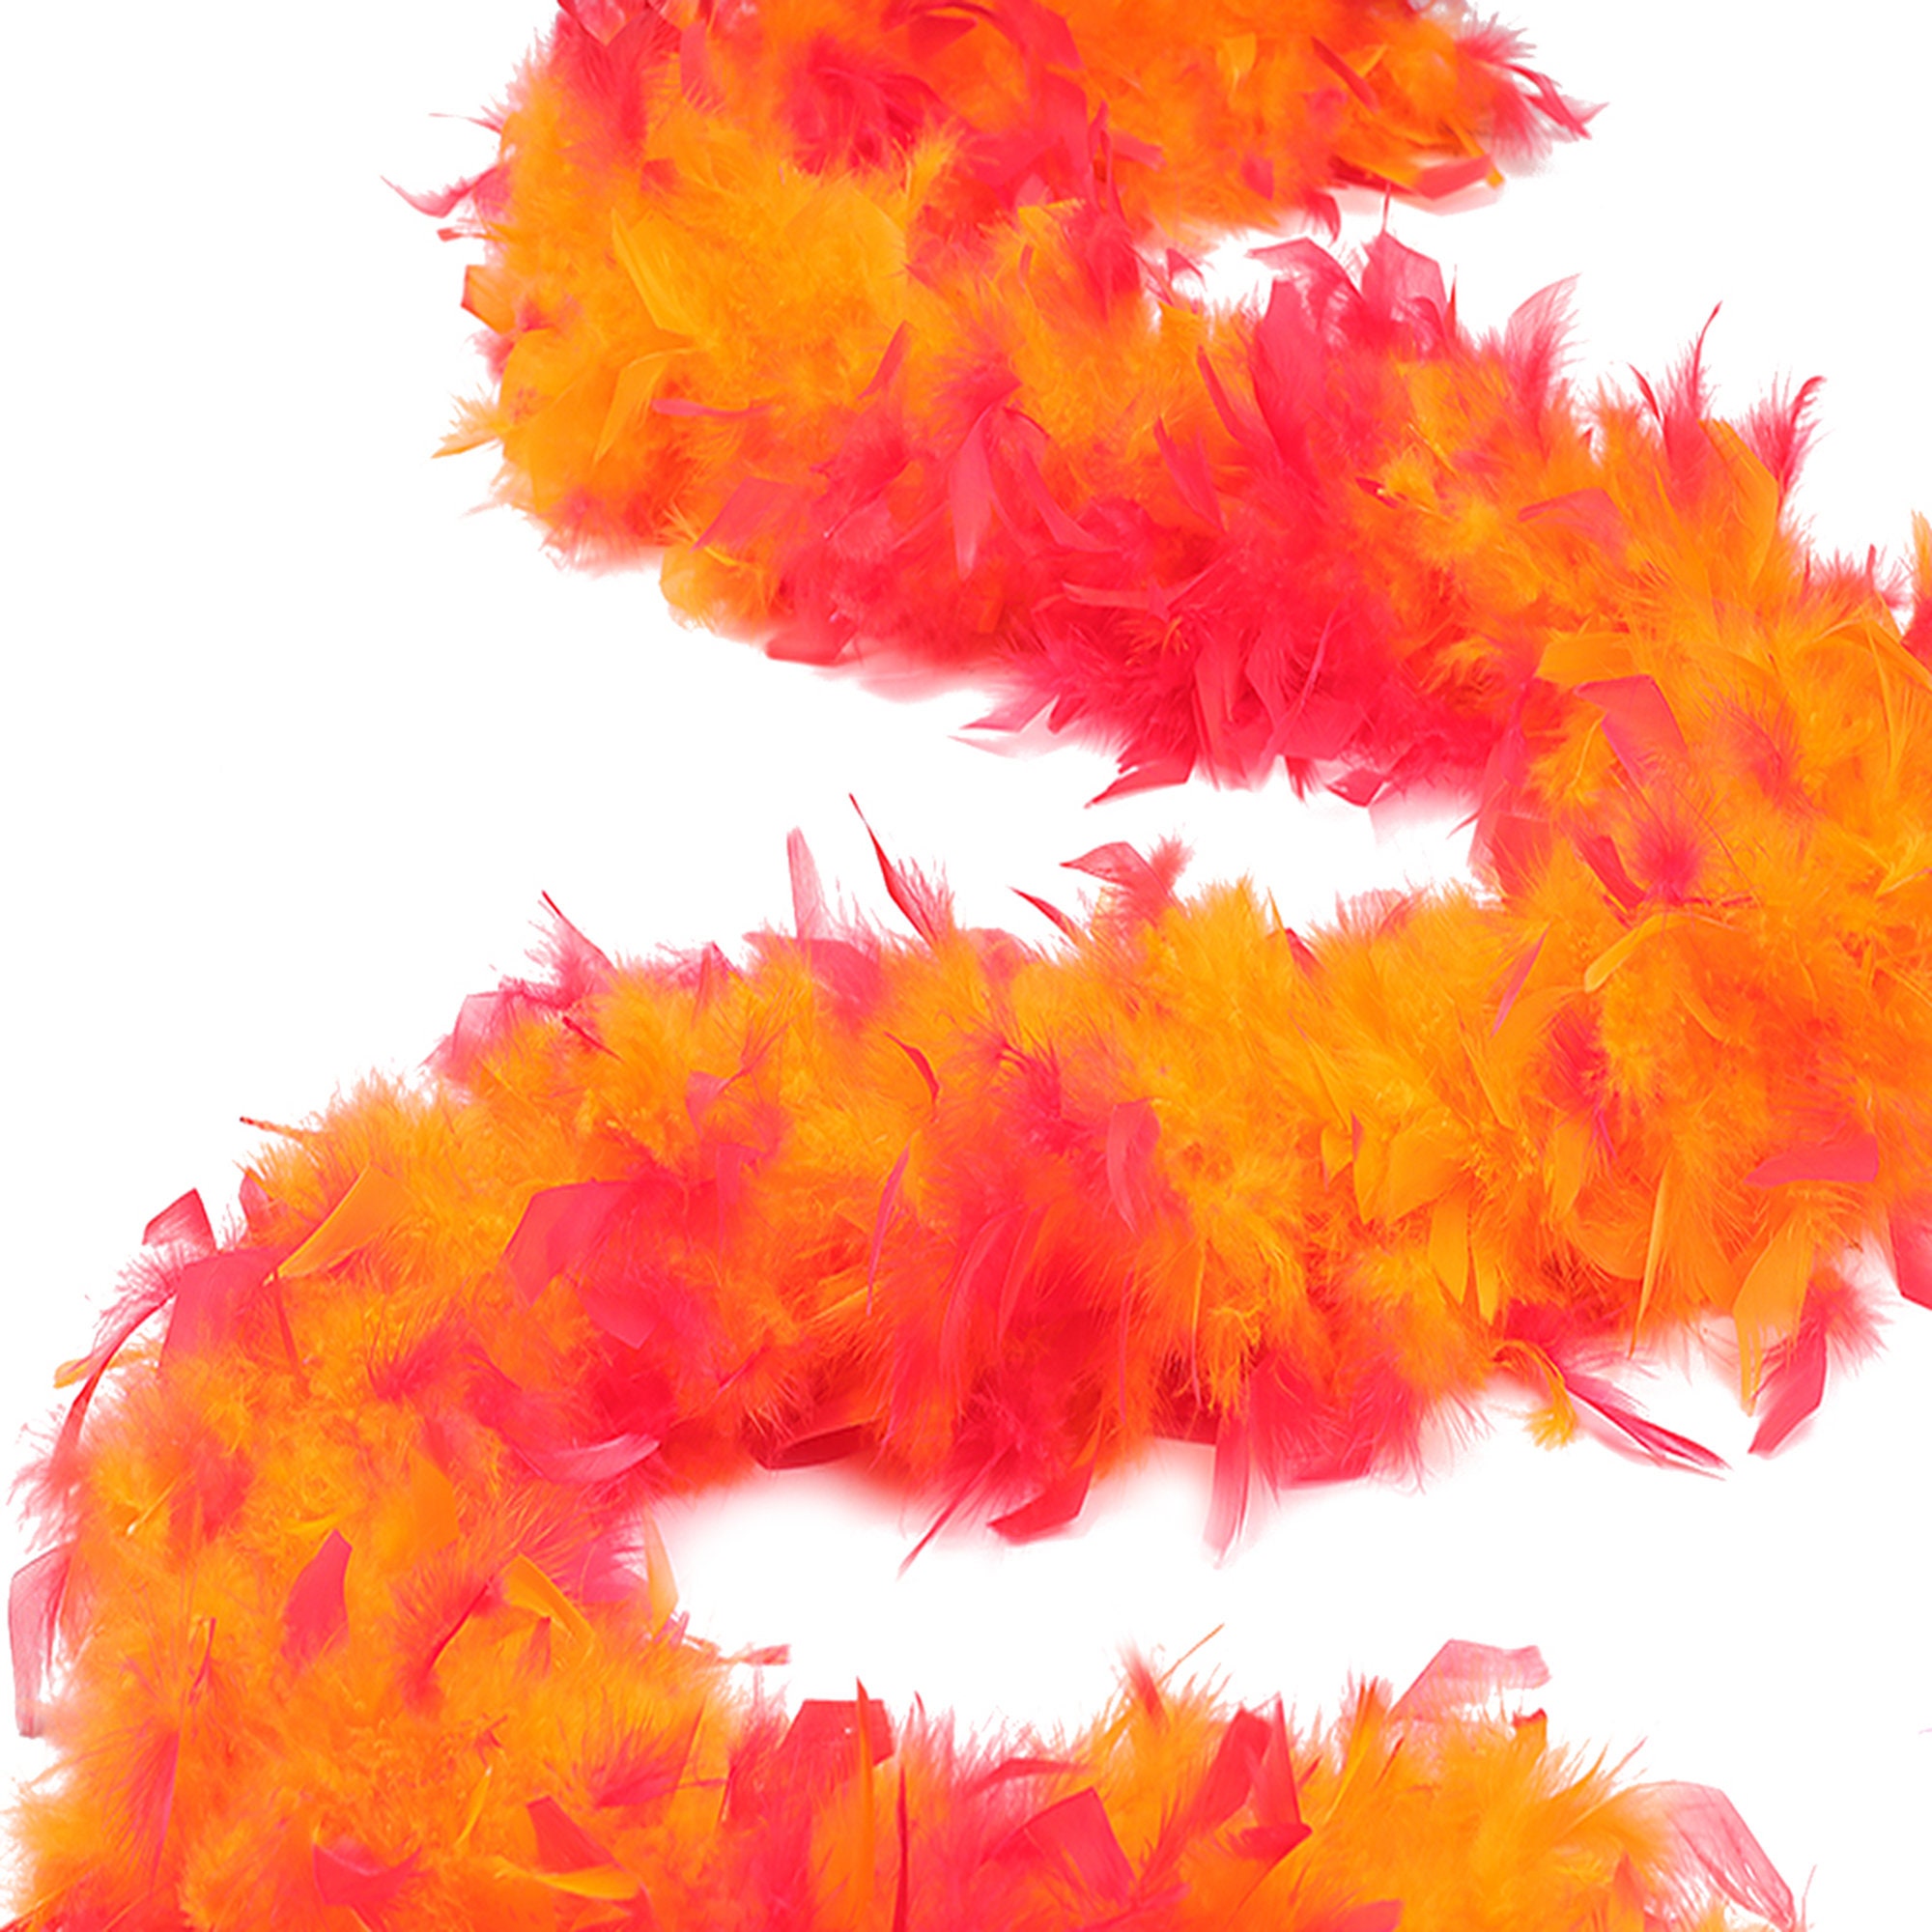 Larryhot Orange Boa Feathers for Party - 45g 2 Yards Feather Boas for Adults,Wedding,Concert,Christmas Tree and Party Home Decoration(45g-Orange)